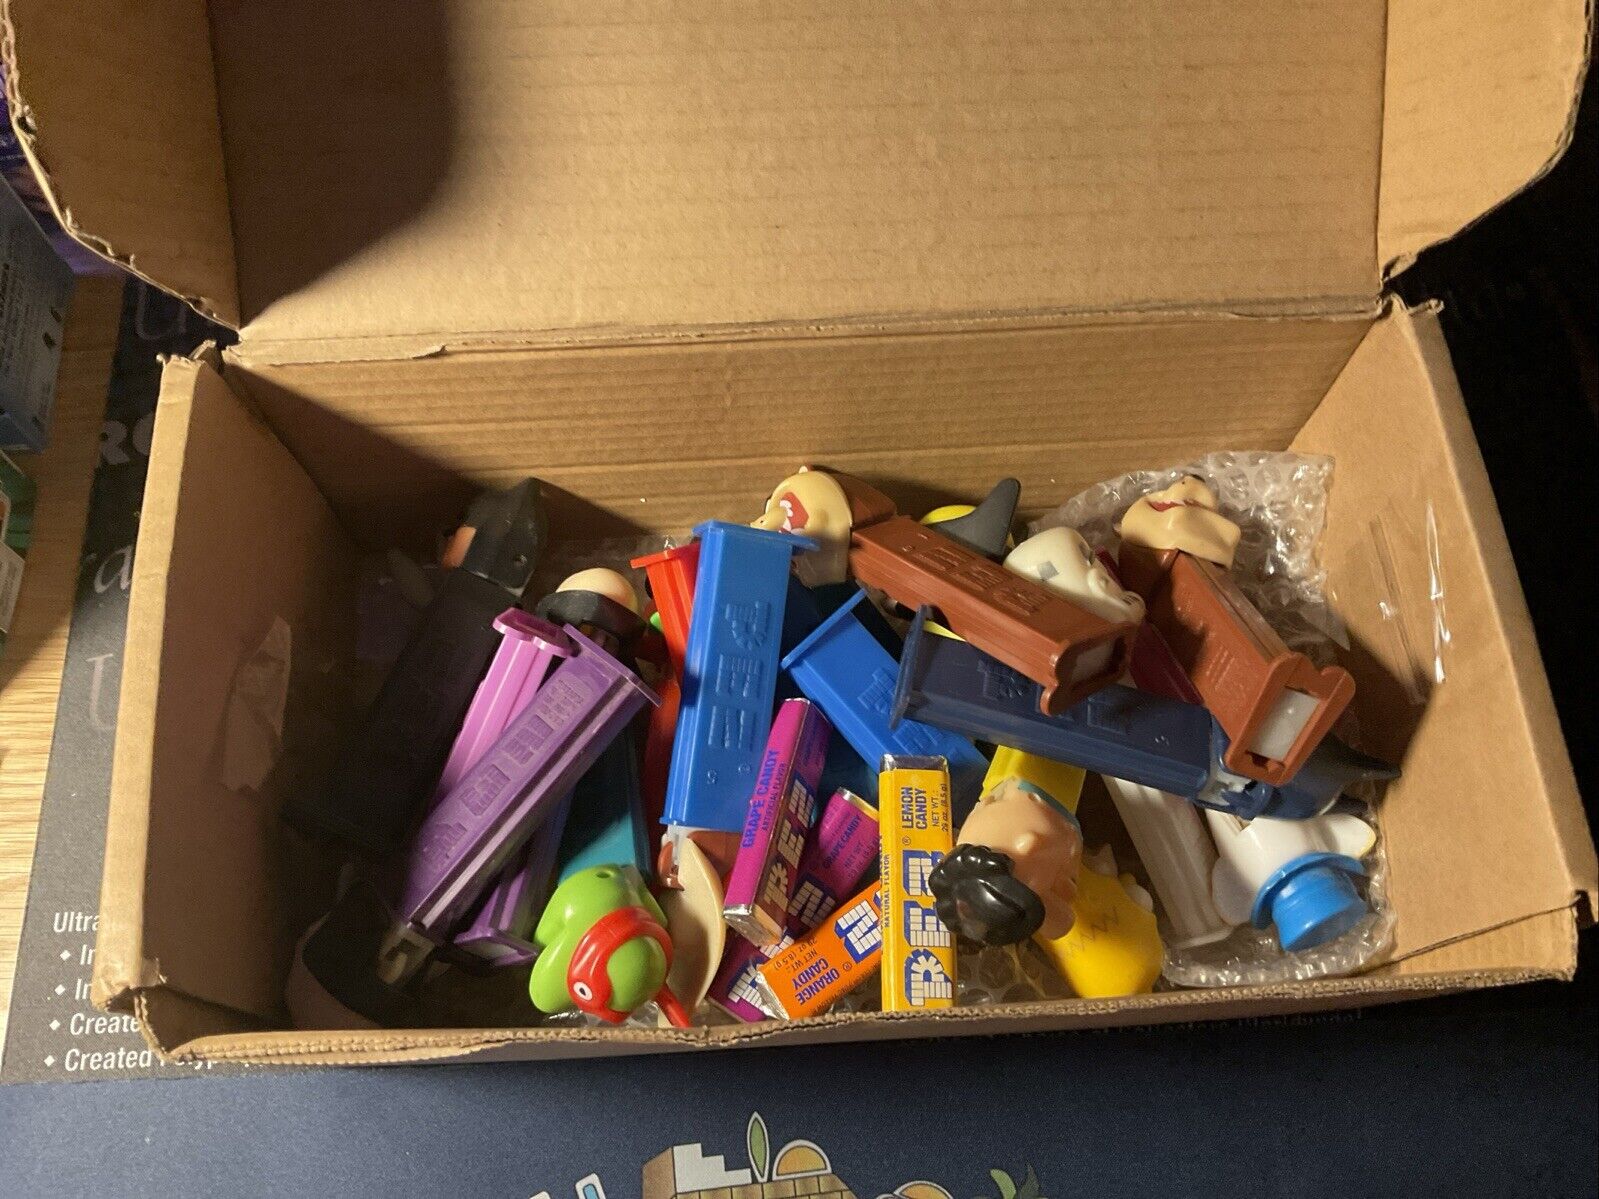 19 Old Vintage Pez Dispensers 🤑🤑🤑🤑 Helps Support Charity